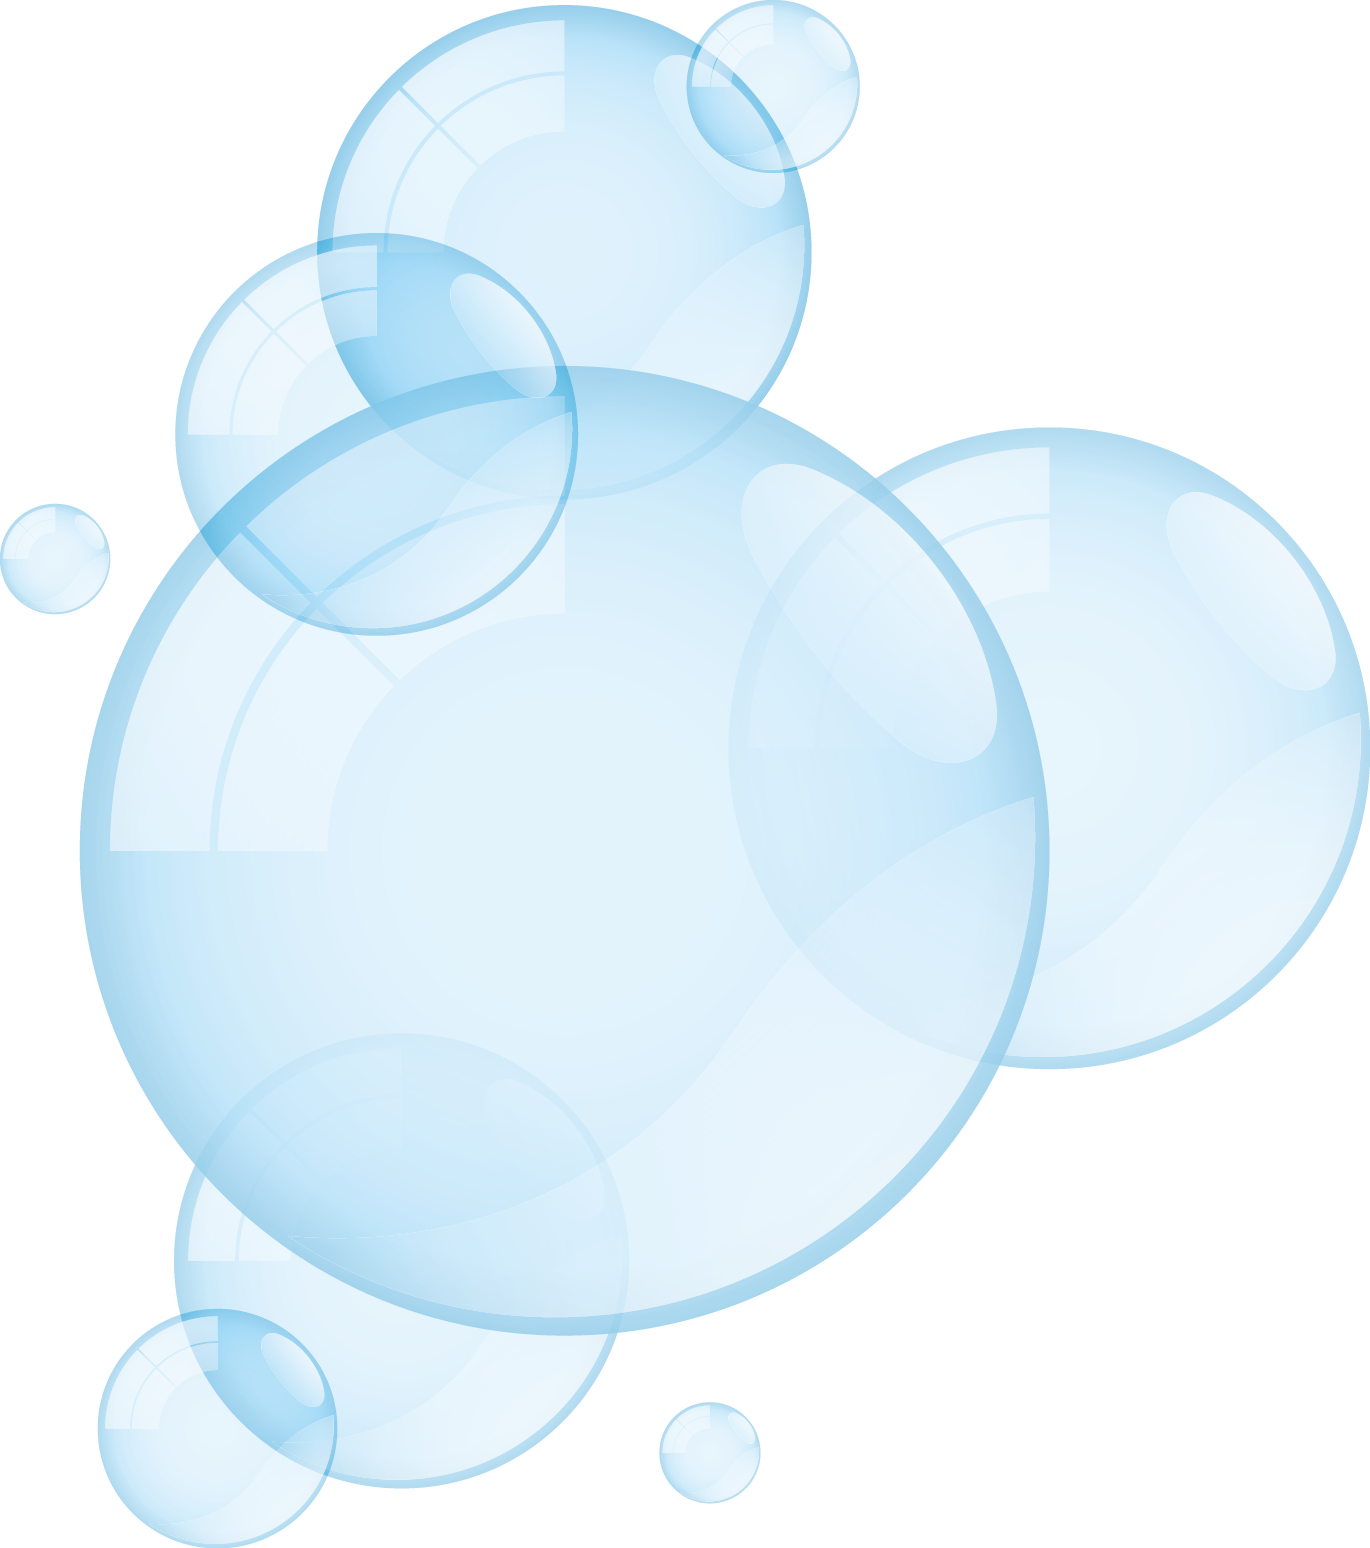 Abstract Bubble Overlay Graphic PNG image